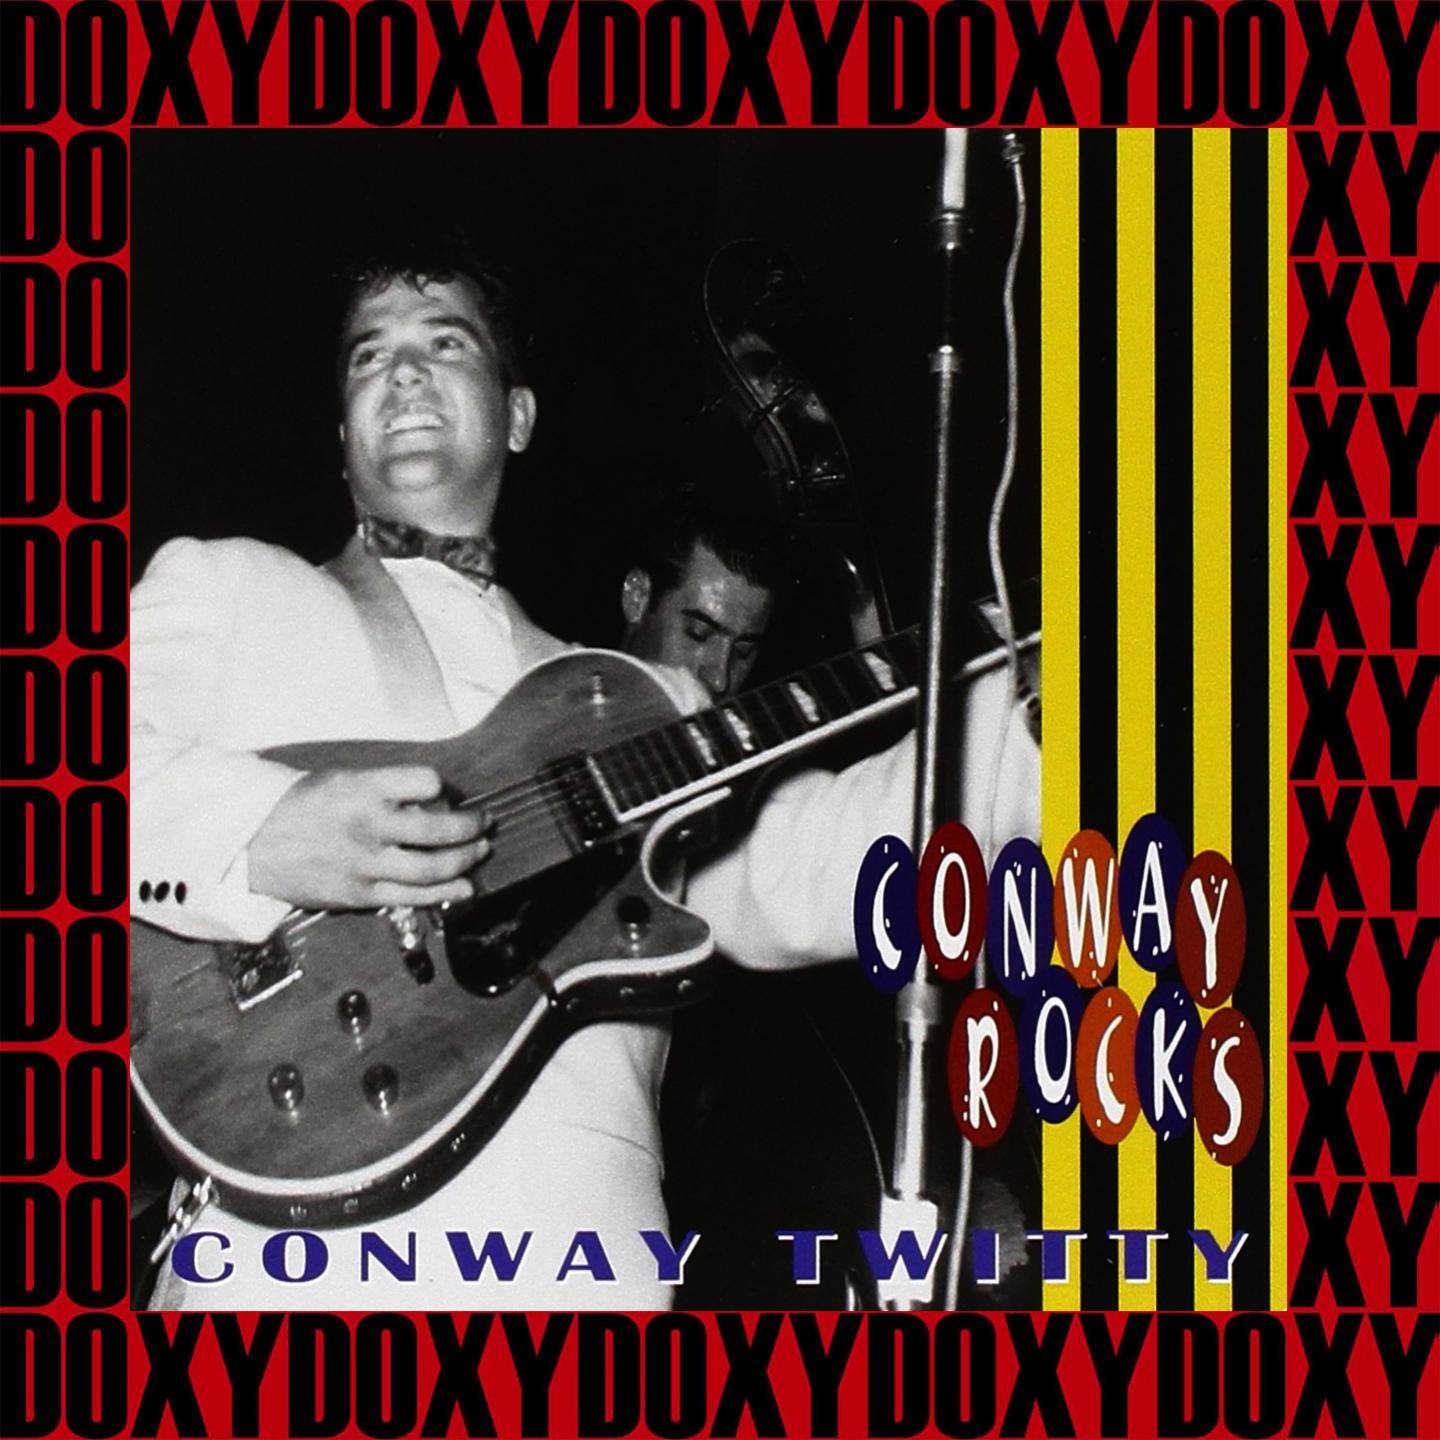 Conway Rocks (Remastered Version) (Doxy Collection)